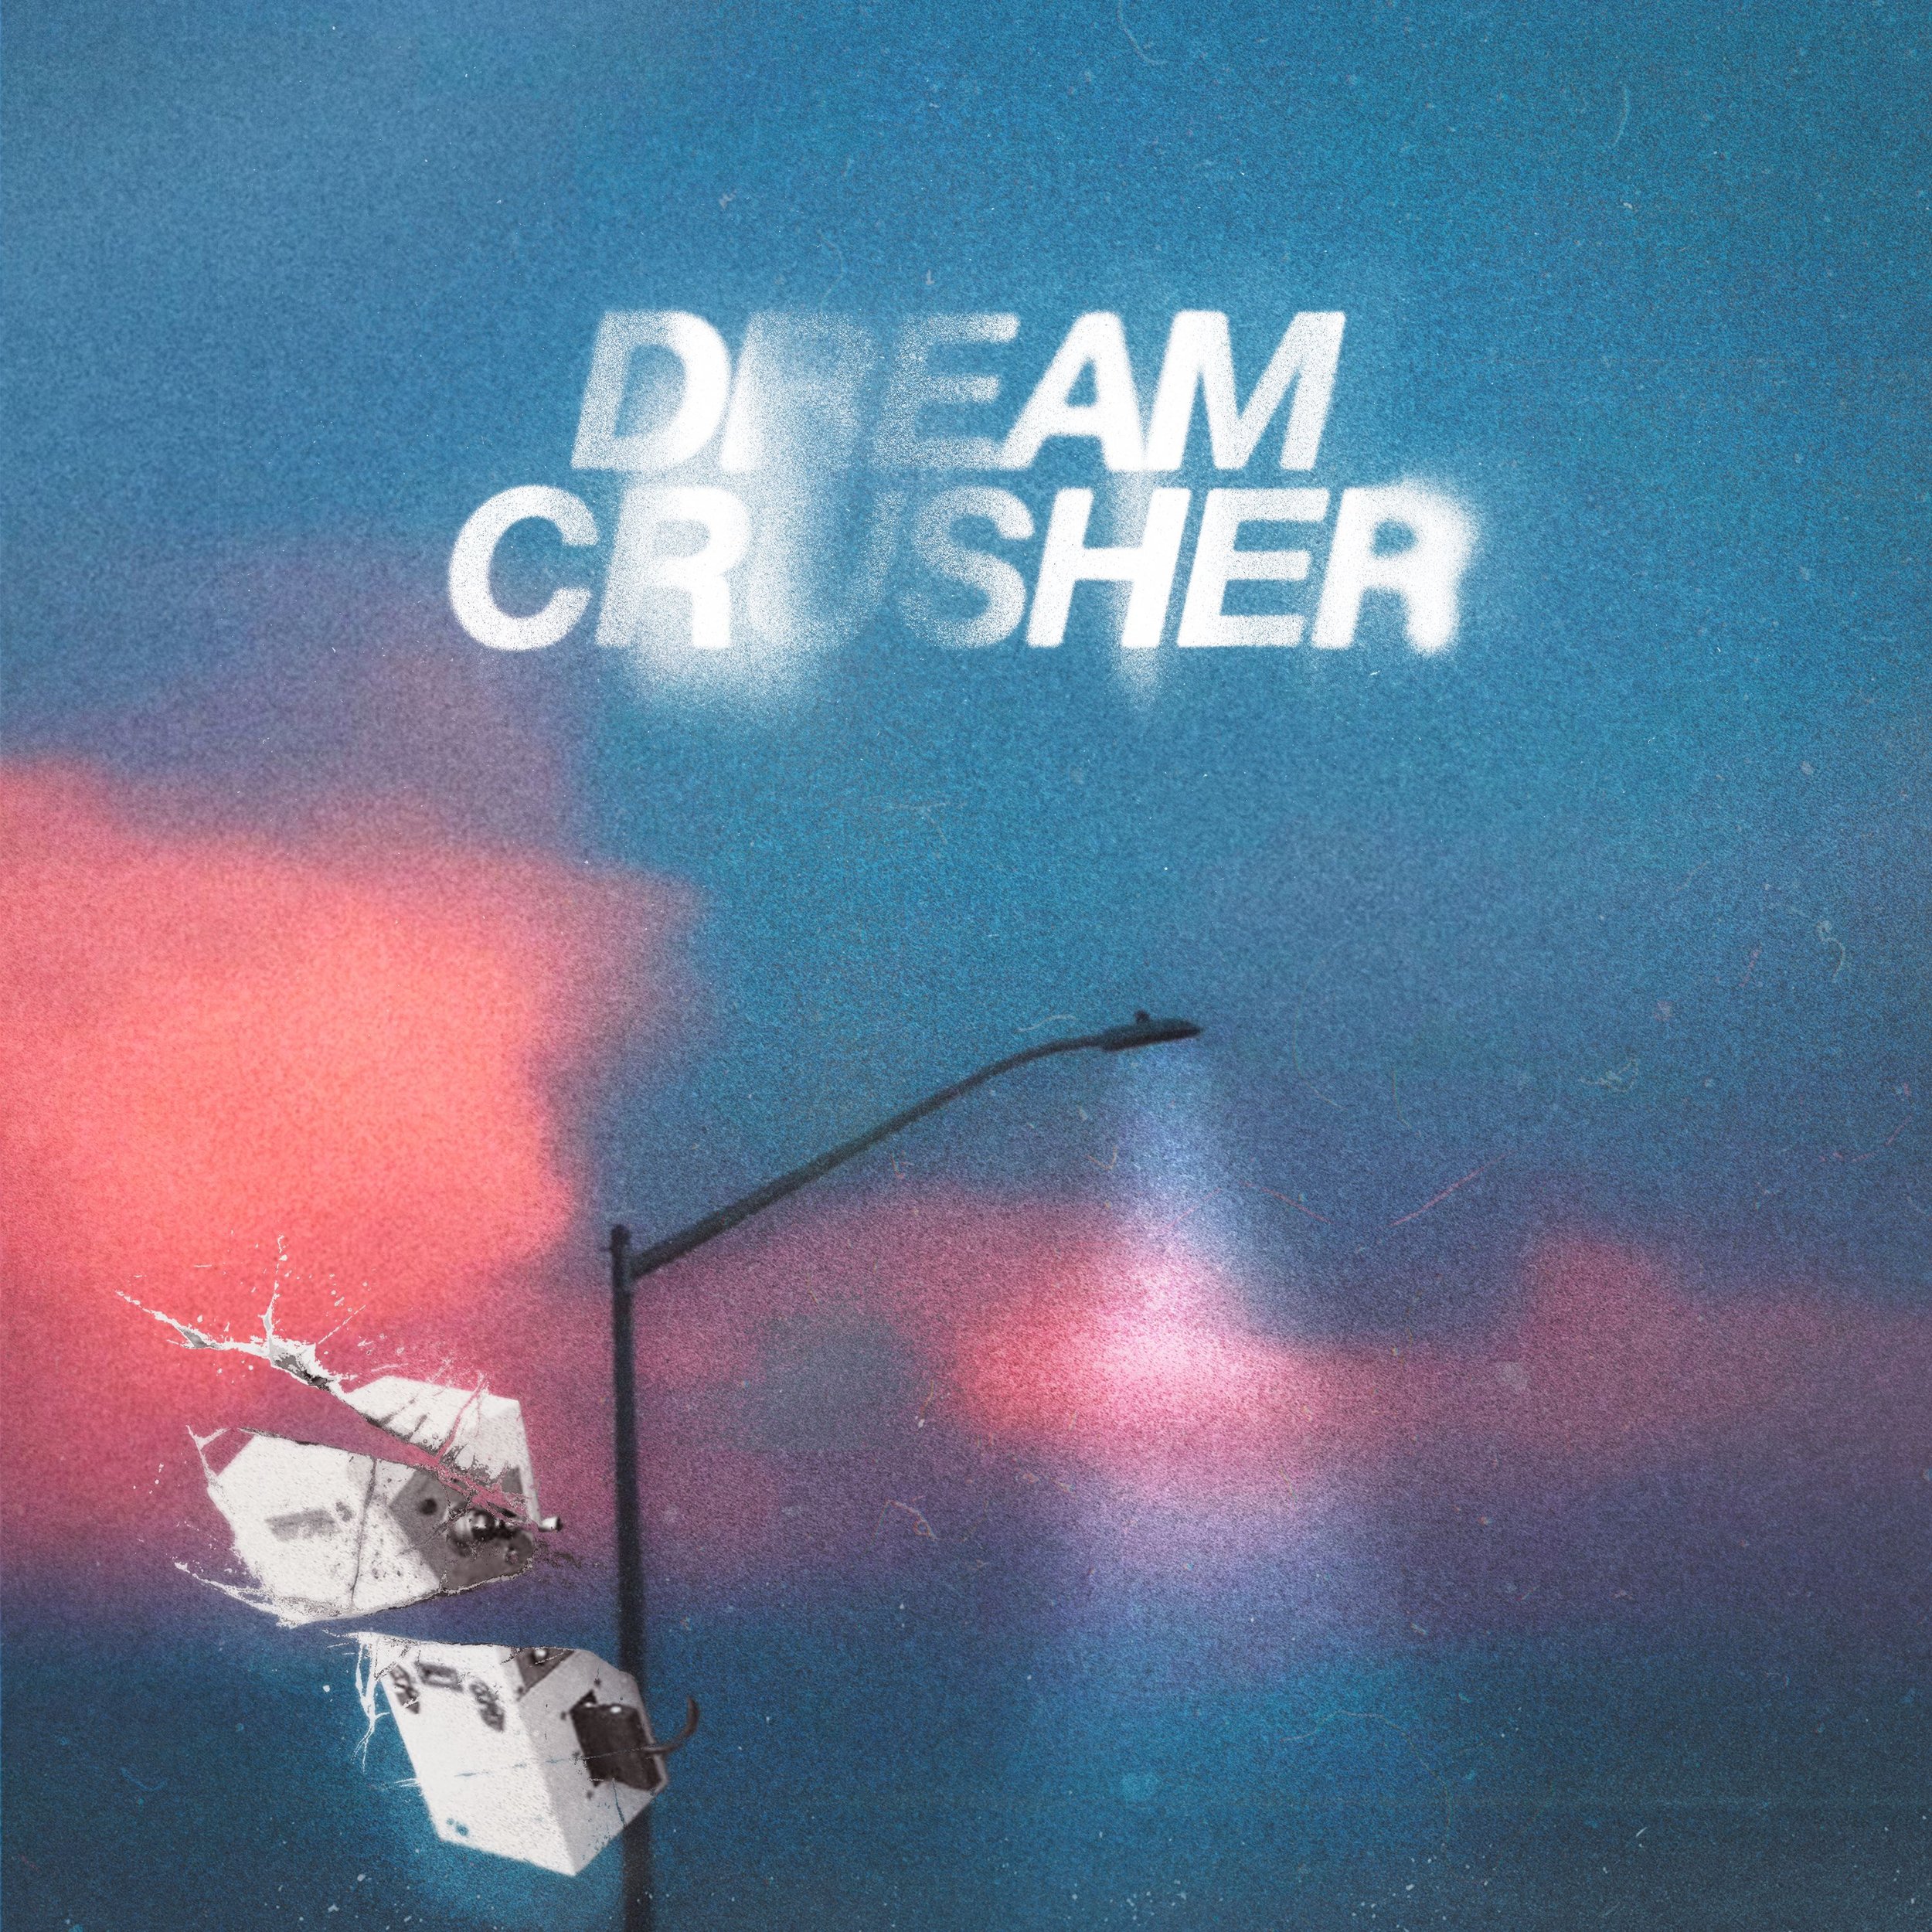 Dream Crusher by Quinn Mills hits all streaming platforms — MP